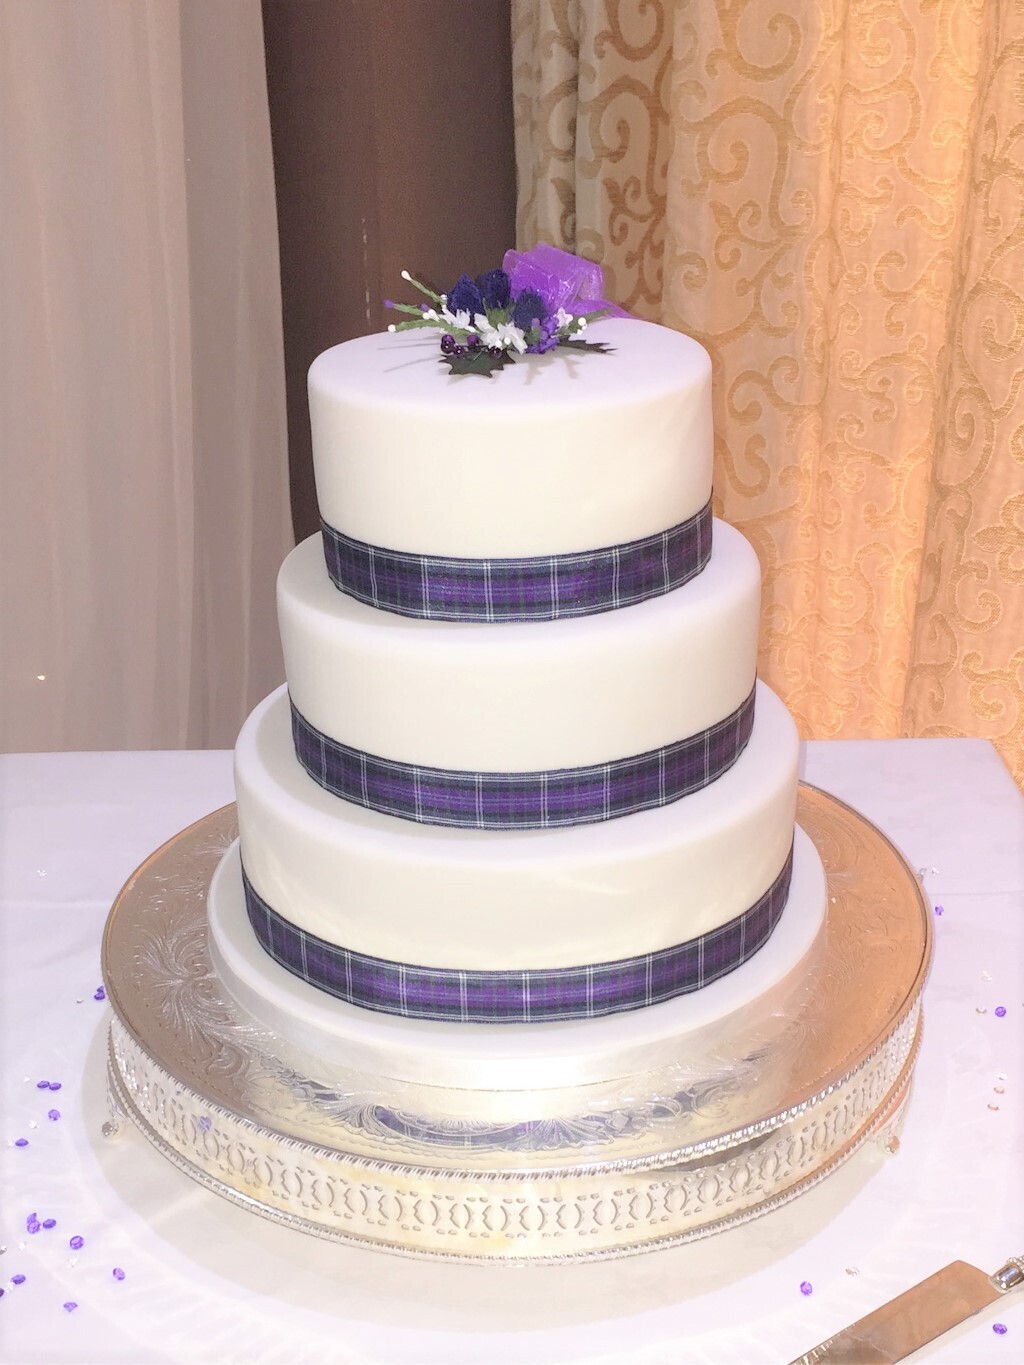 Gretna Green Three-Tier Cake with Tartan Ribbons and Thistles